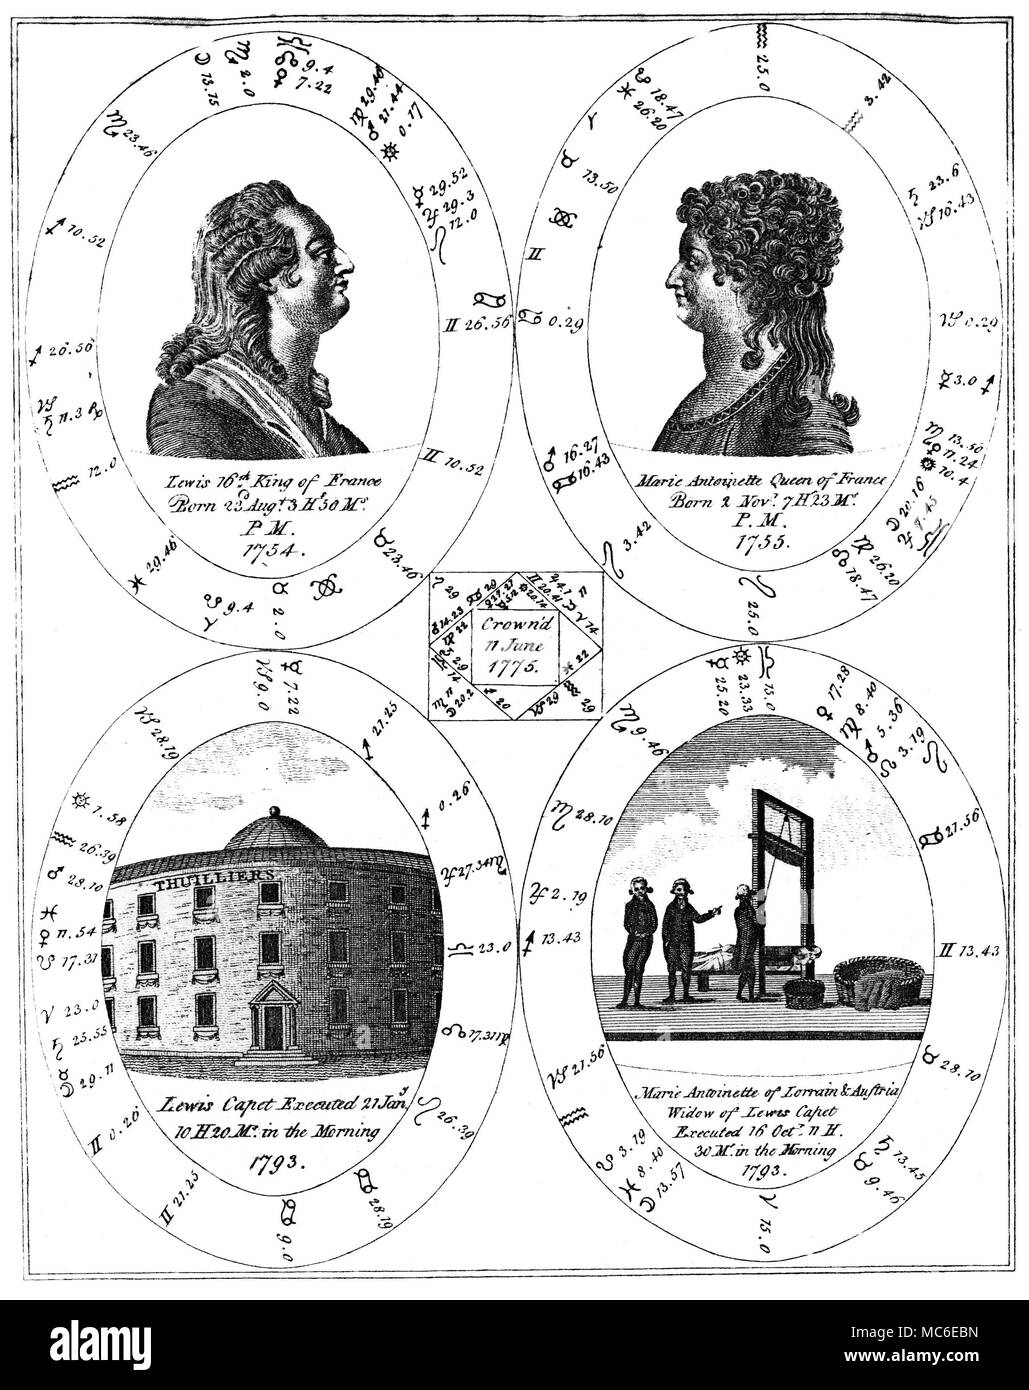 HOROSCOPES - MARIE ANTOINETTE AND LOUIS XVI A sophisticated copperplate, containing five related horoscopes, from Ebenezer Sibly, A New and Complete Illustration of the Occult Sciences: or the Art of foretelling future Events and Contingencies... 179... Louis XVI was born on 23 August, 1754: as the chart below indicates, he was executed on 21 January 1793. His wife, Marie Antoinette, was born on 2 November 1755, and (as is plain from the chart below, with the grisly detail of the guillotine), she was executted on 16 October 1793. The small central square horoscope is cast for the time Stock Photo